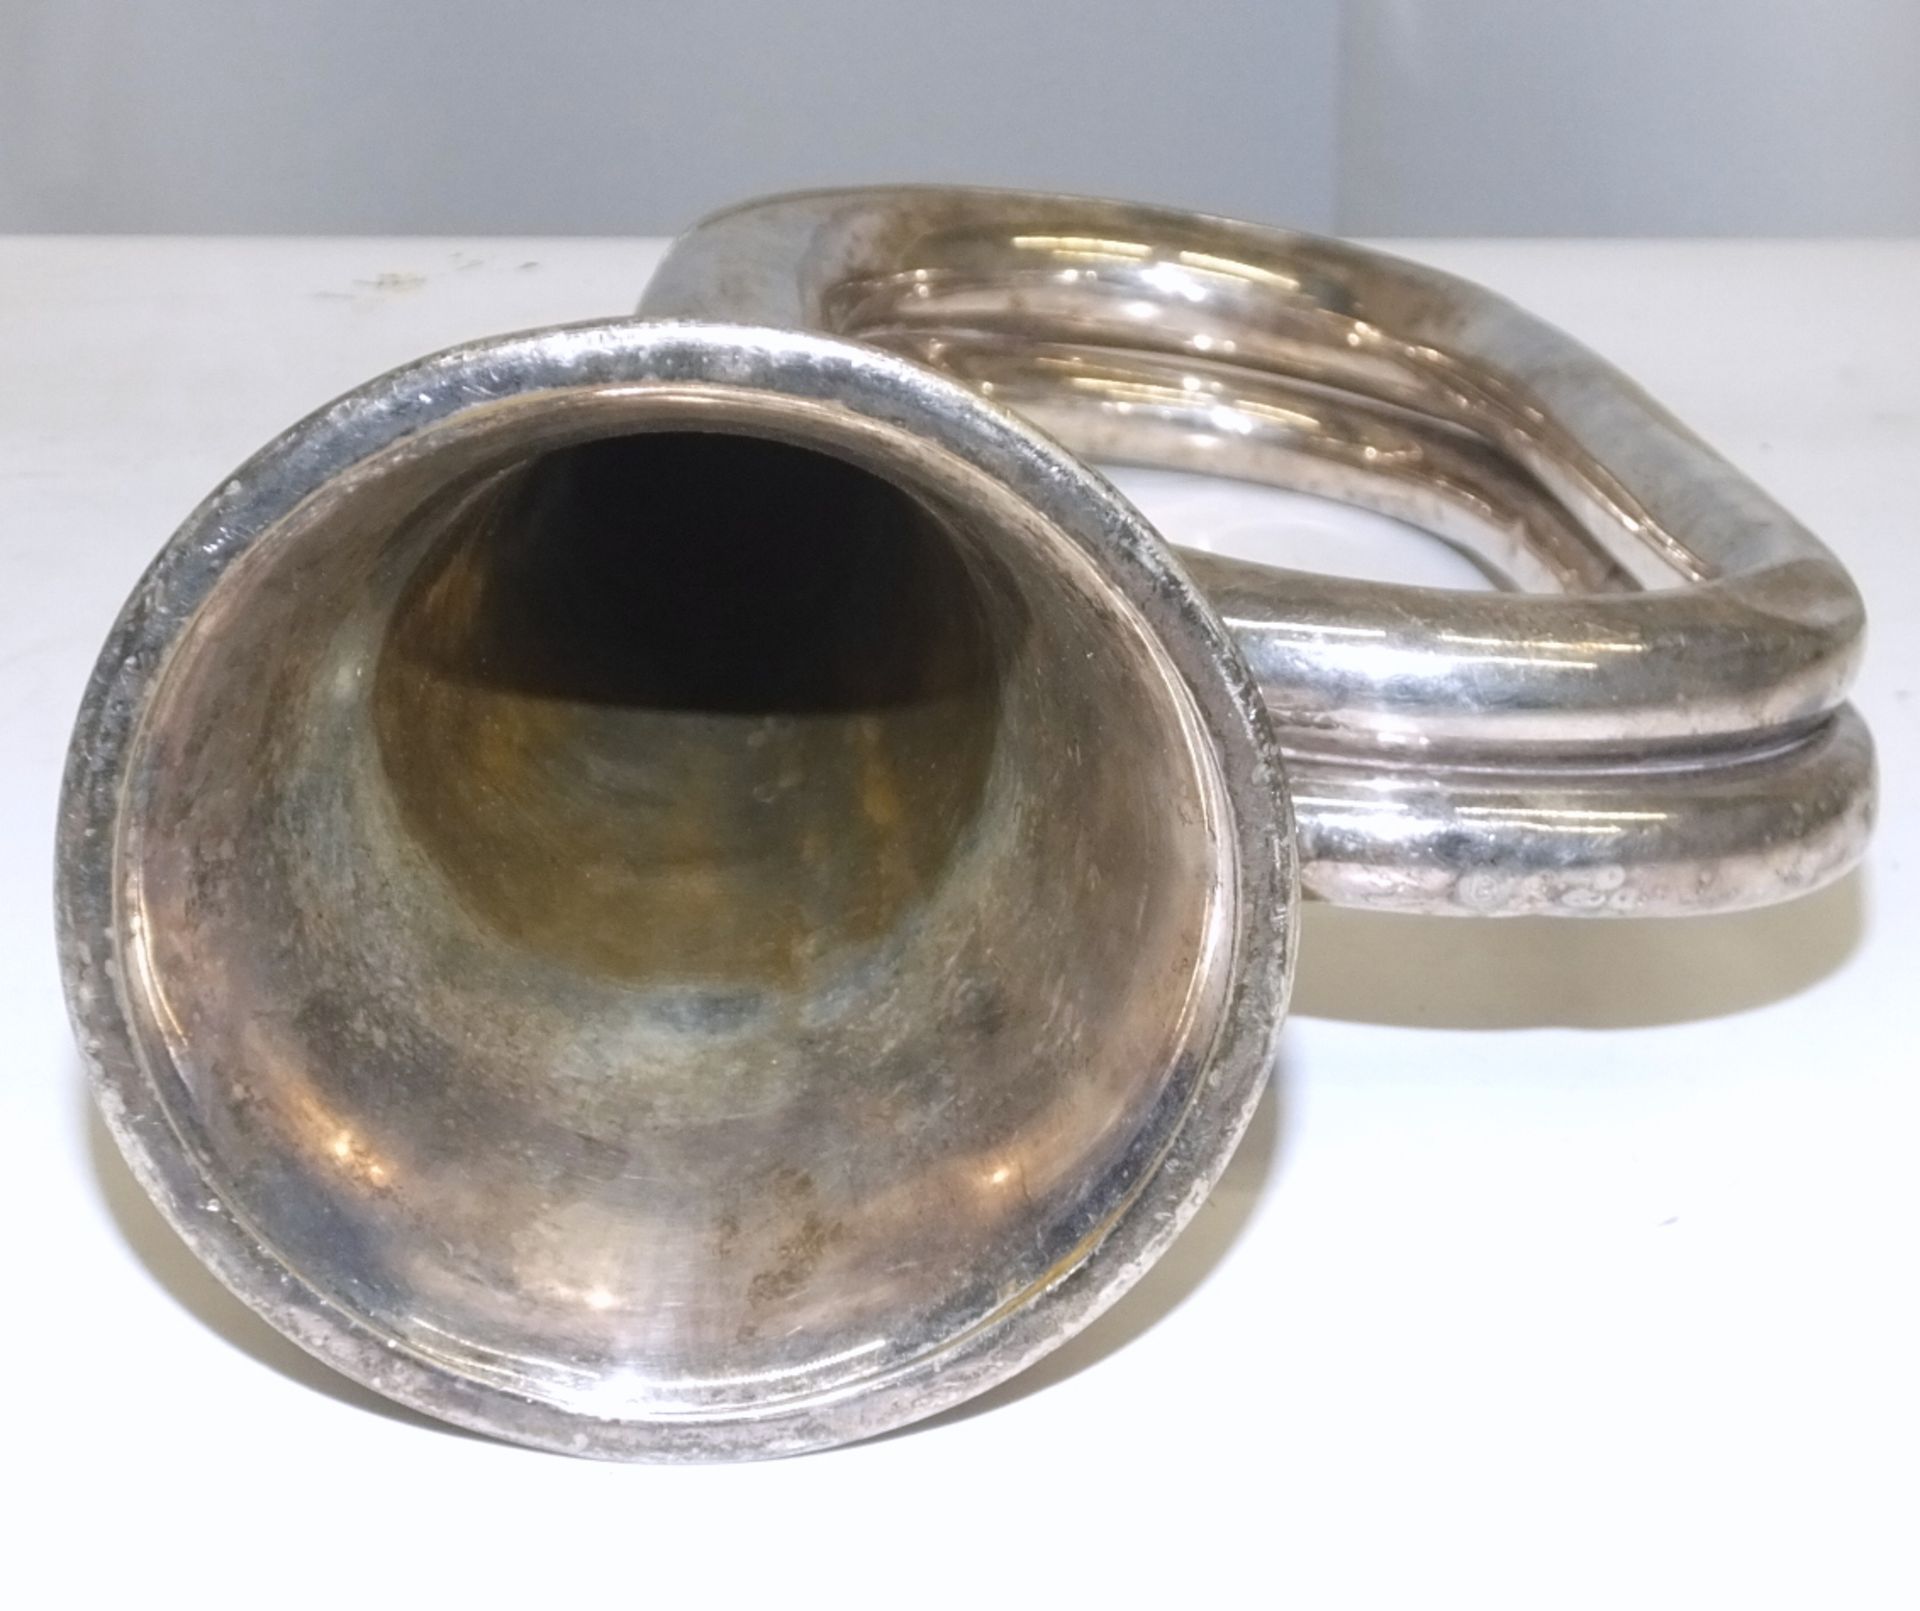 McQueens Bugle - Serial Number - 938 (lining clamp damaged and dents in bugle) - Image 3 of 3